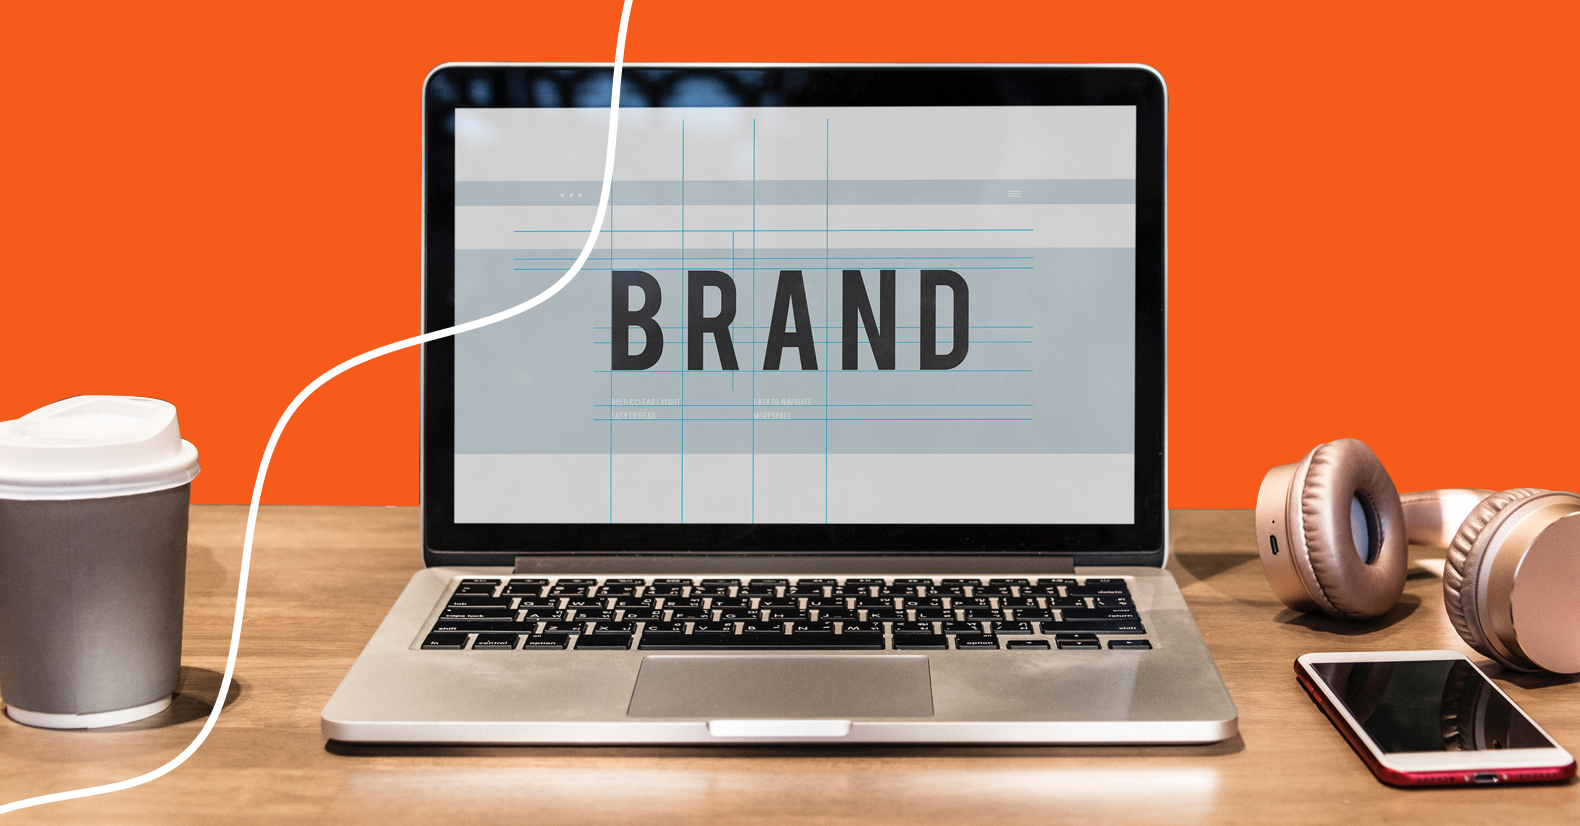 How to Build Your Brand - Brand Identity Checklist